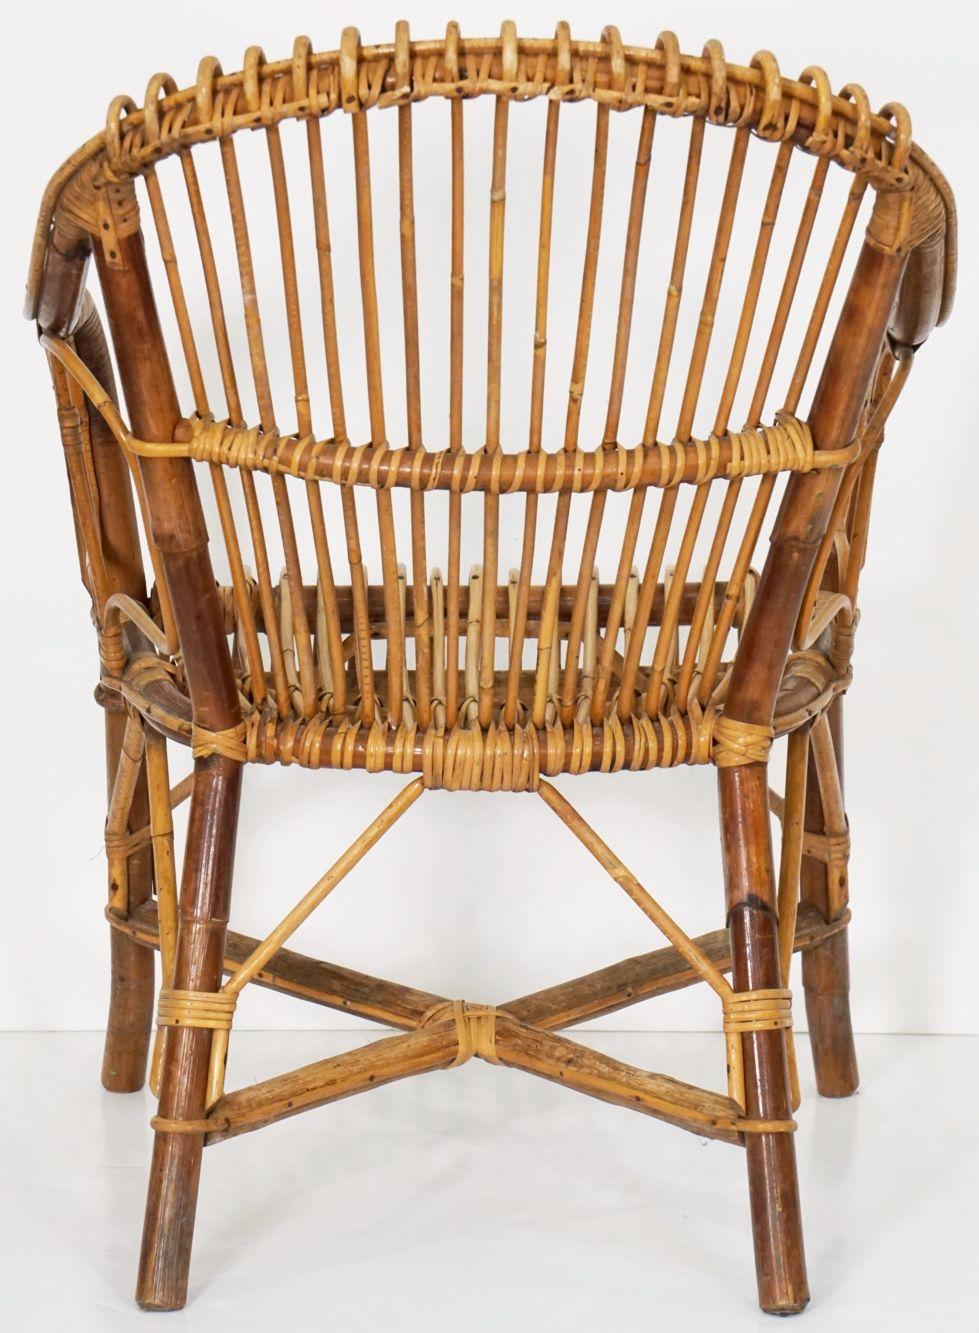 Italian Fan-Backed Arm Chairs of Rattan and Bamboo from the Mid-20th Century For Sale 15